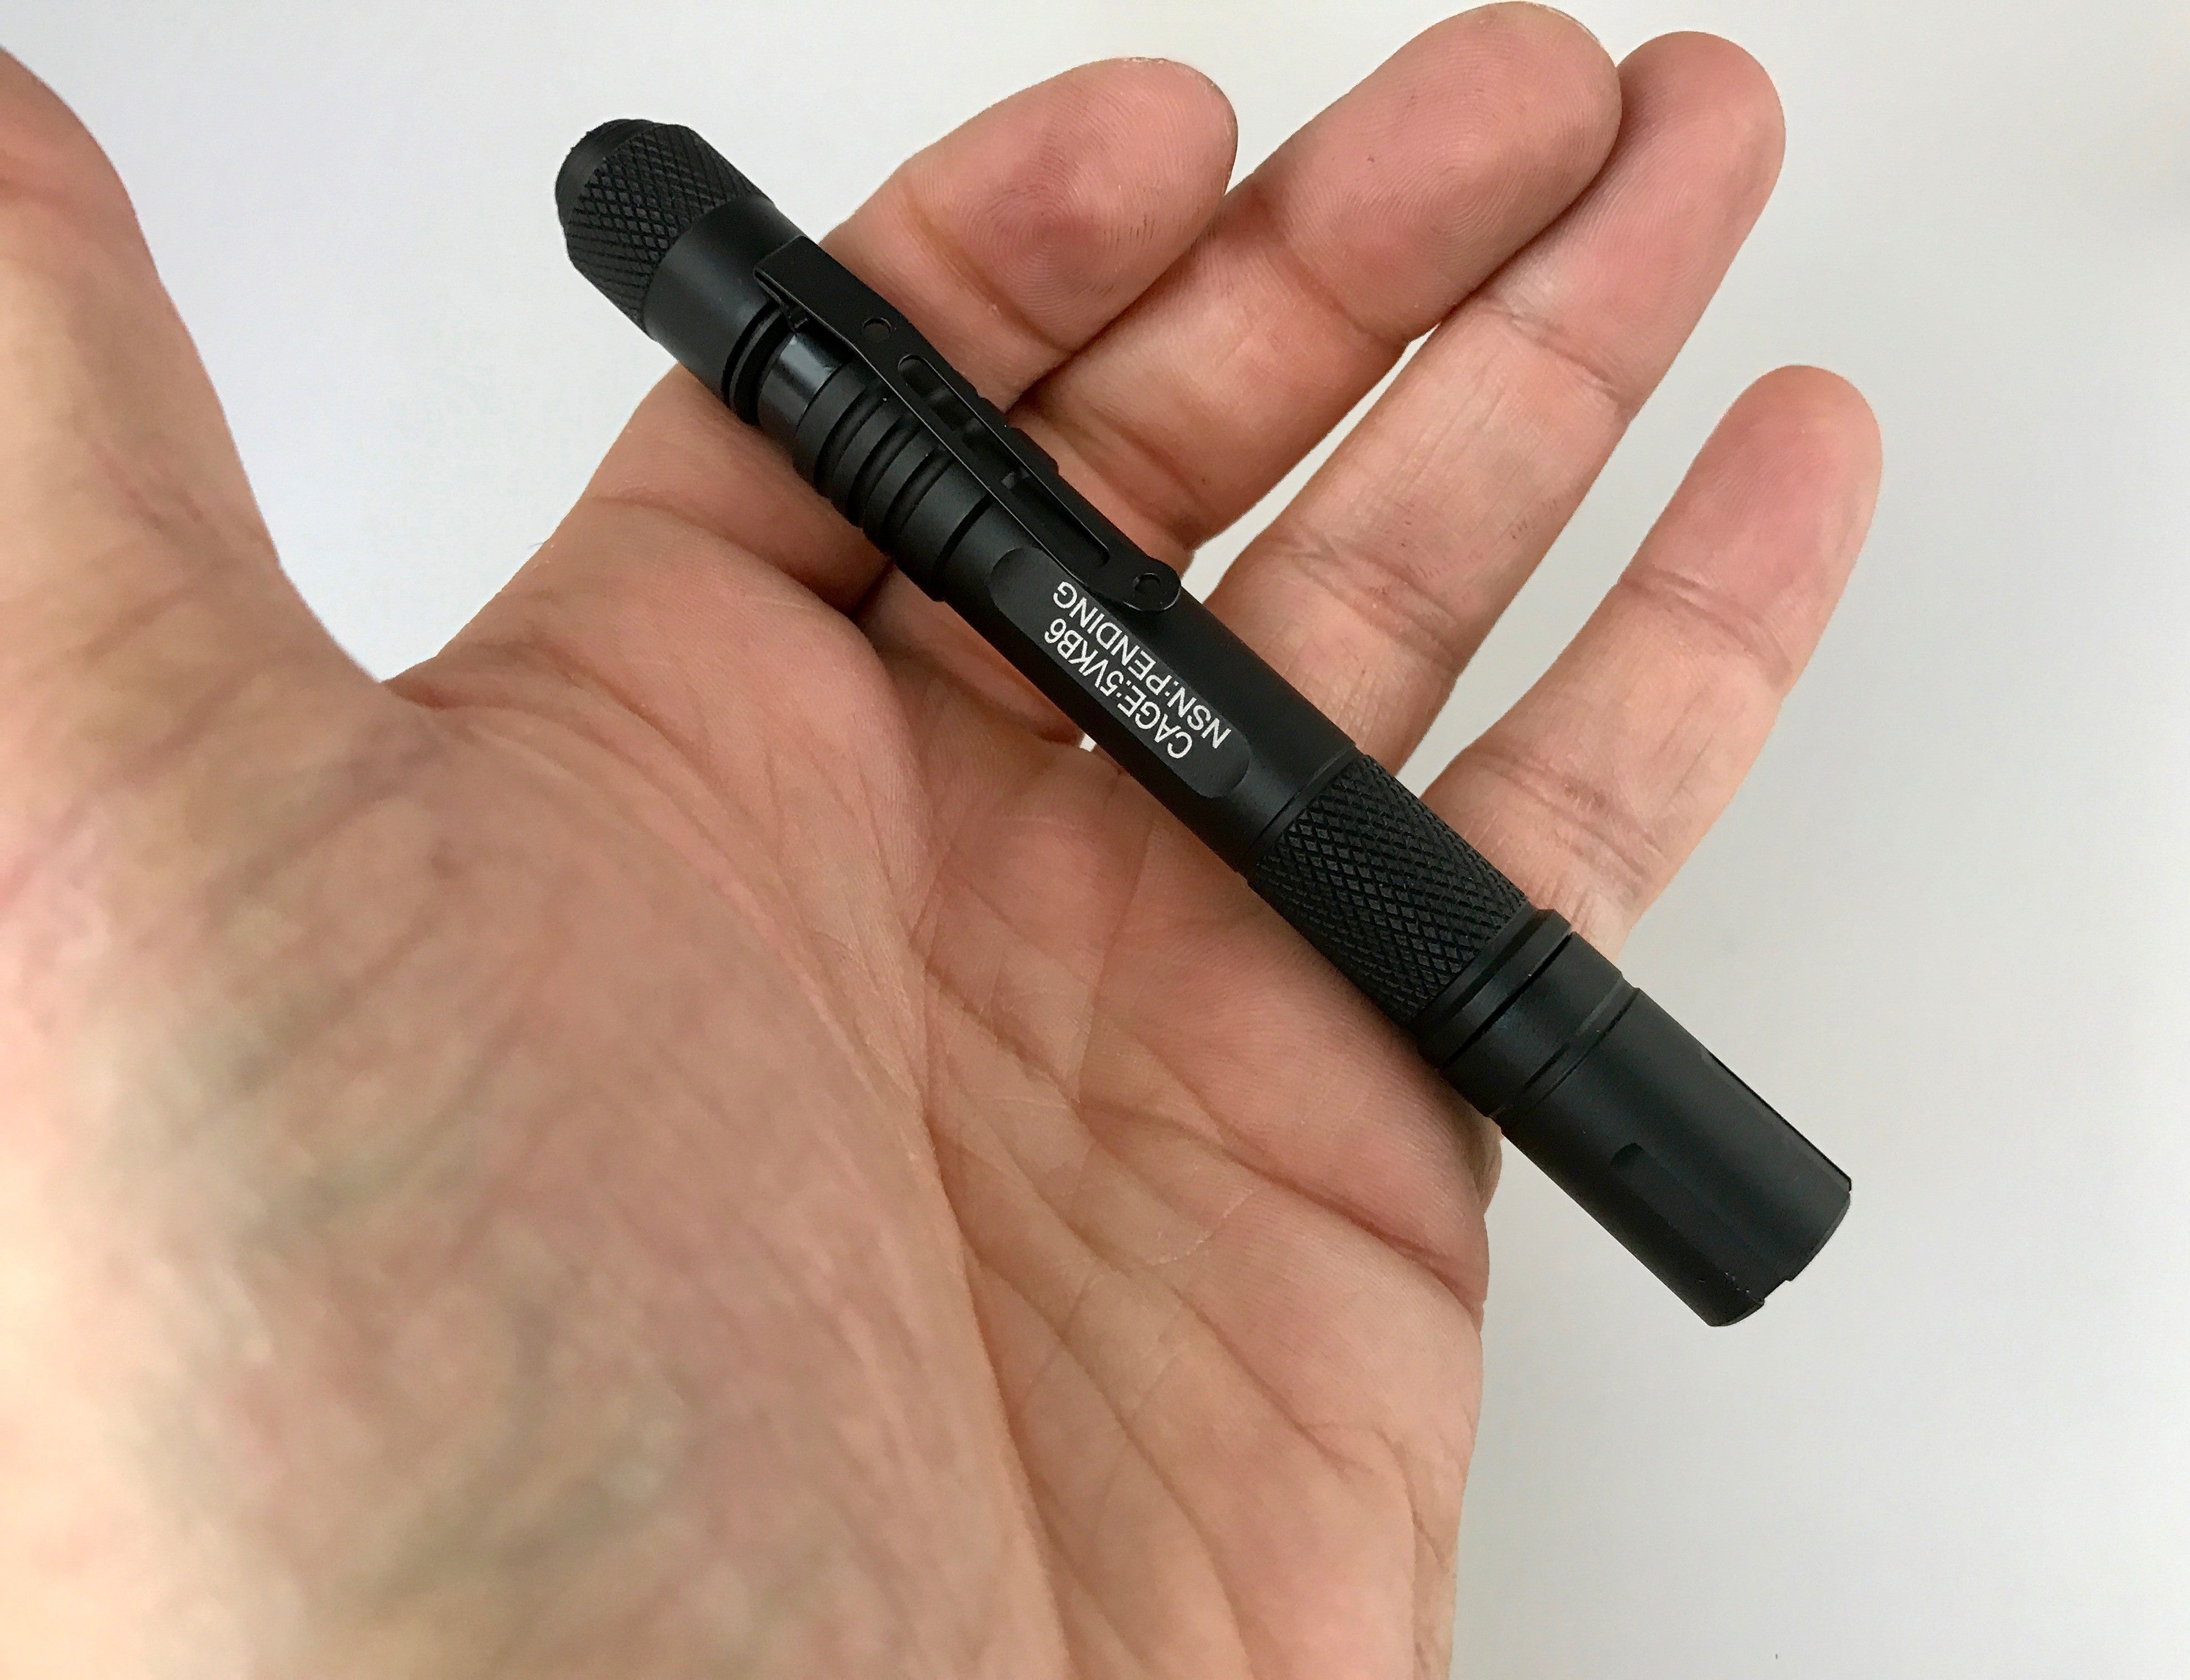 Inspection : AAAx2 Extreme  - Tactical Light by Maratac® Rev 3 ( ULTRA SLIM! )